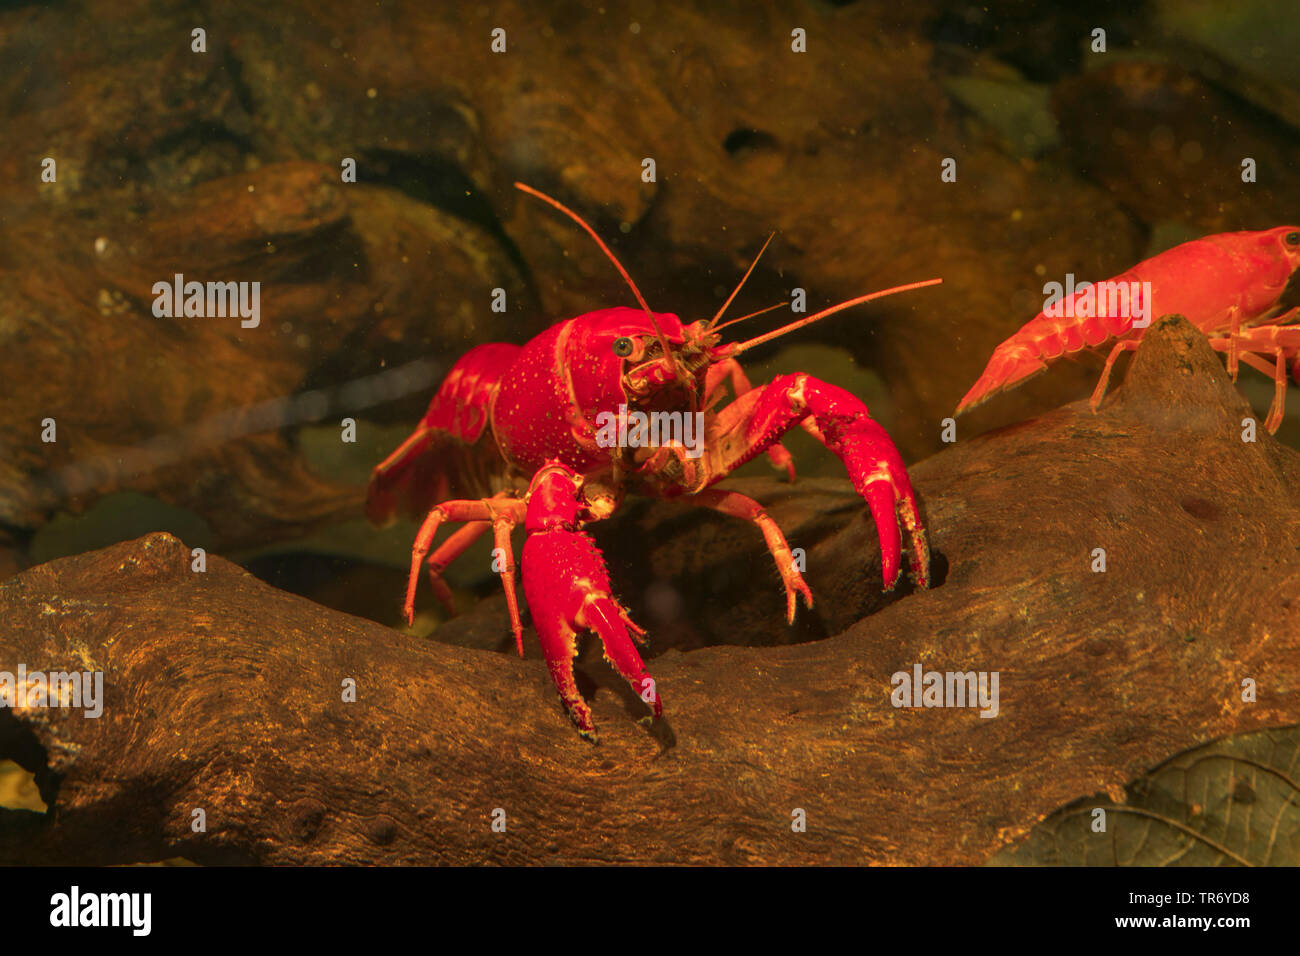 Louisiana red crayfish, red swamp crayfish, Louisiana swamp crayfish, red crayfish (Procambarus clarkii), male on dead wood, Germany Stock Photo